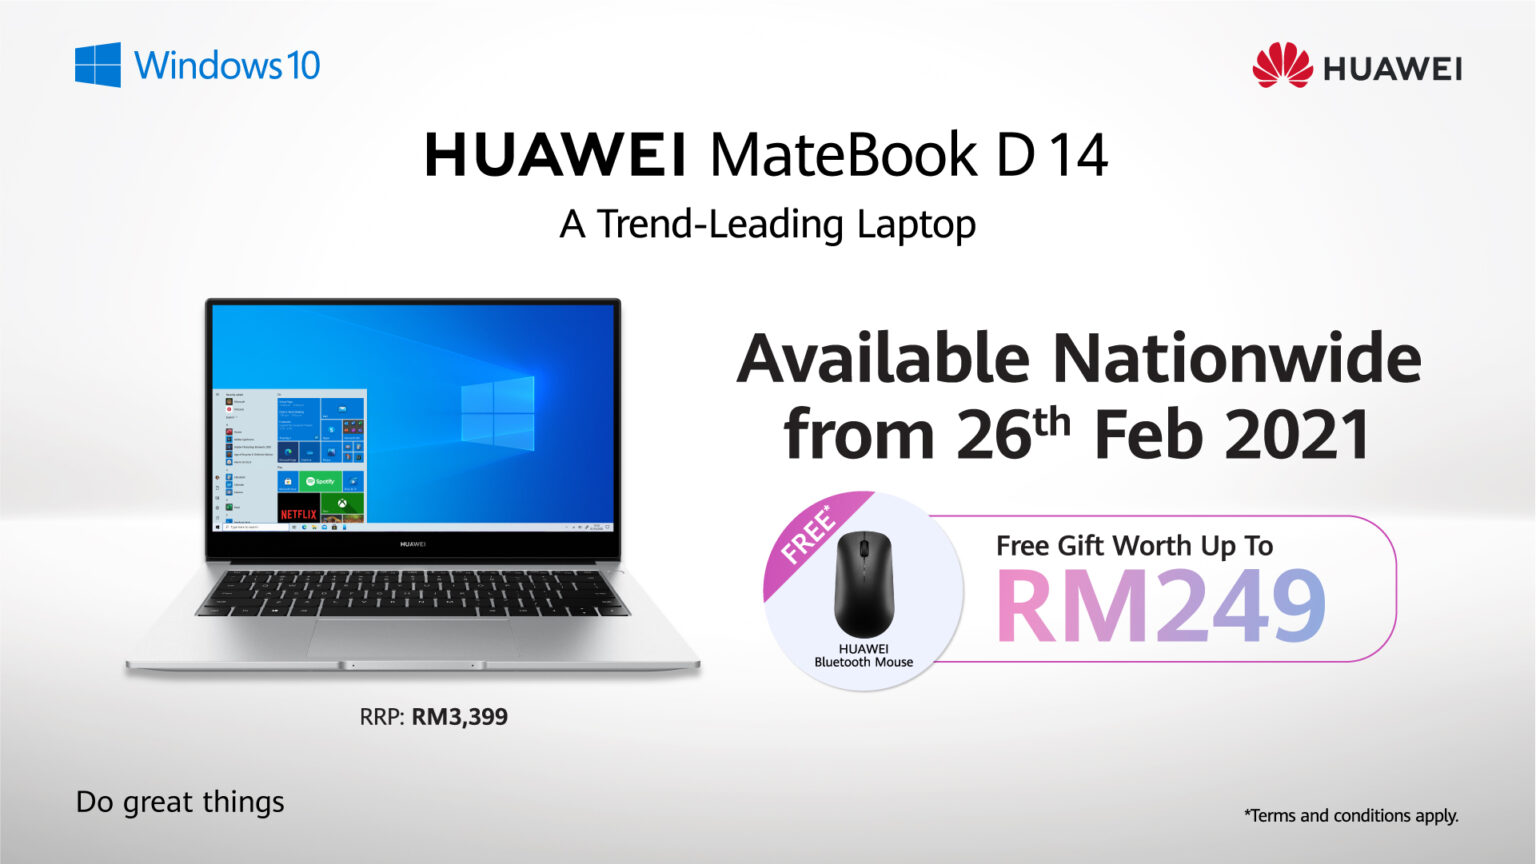 HUAWEI Unveils Its New and Improved HUAWEI MateBook D 14 2020 Intel Edition